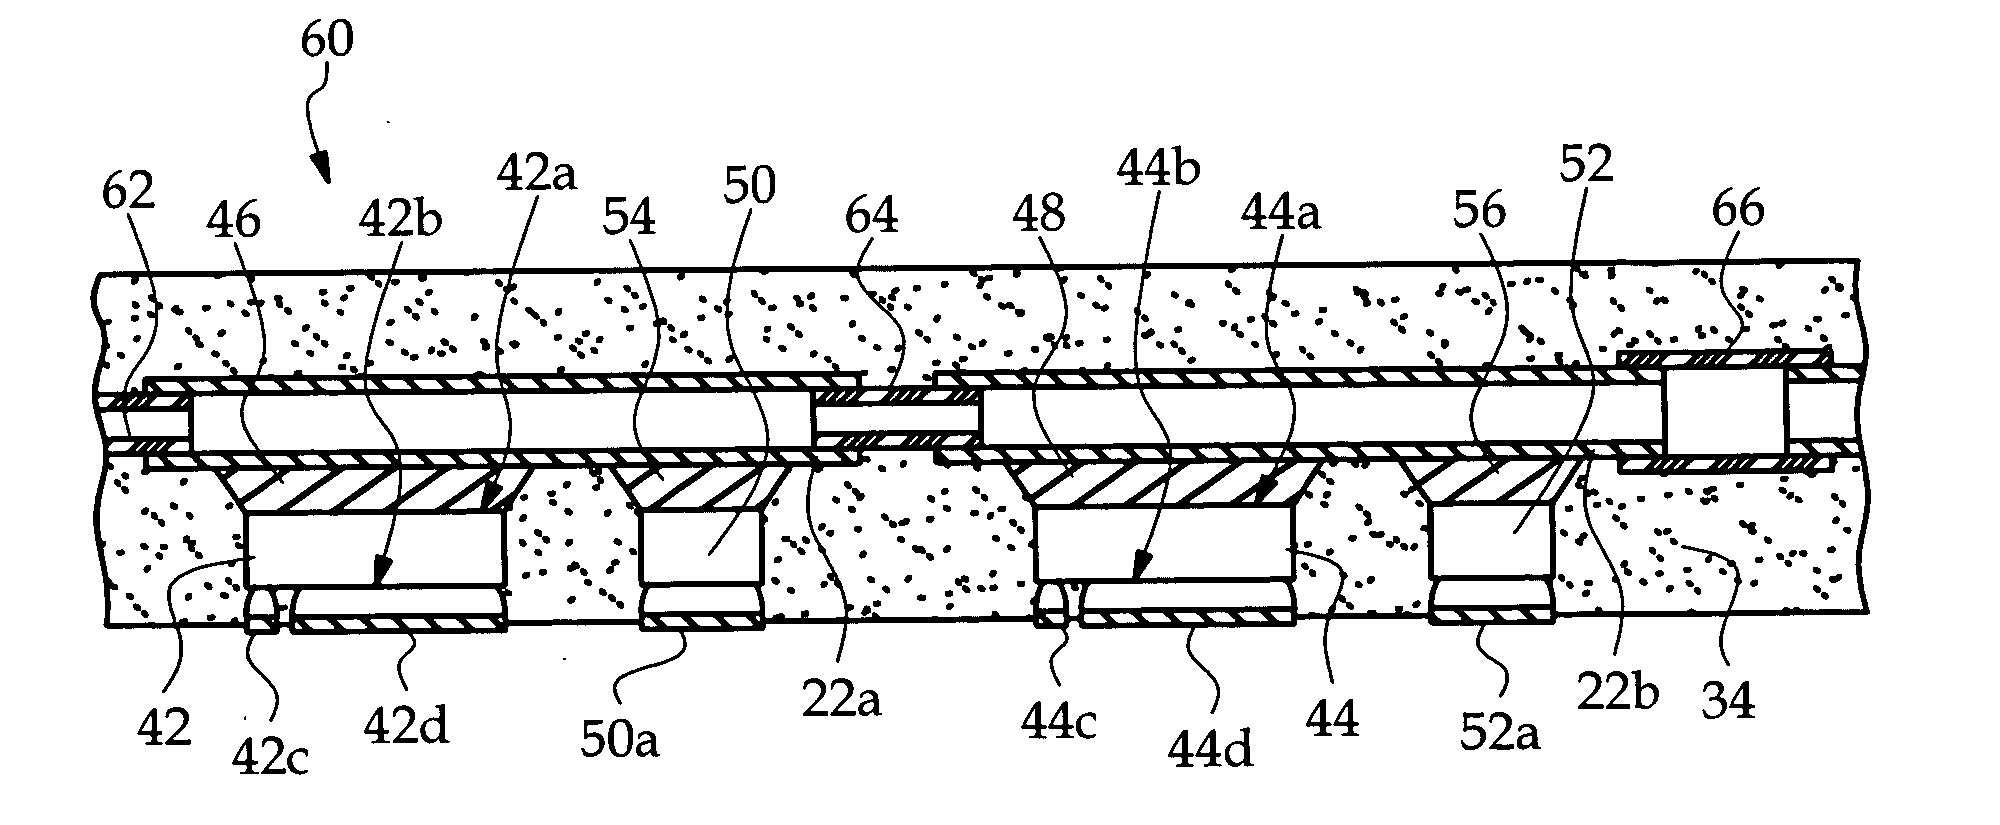 Fluid cooled encapsulated microelectronic package